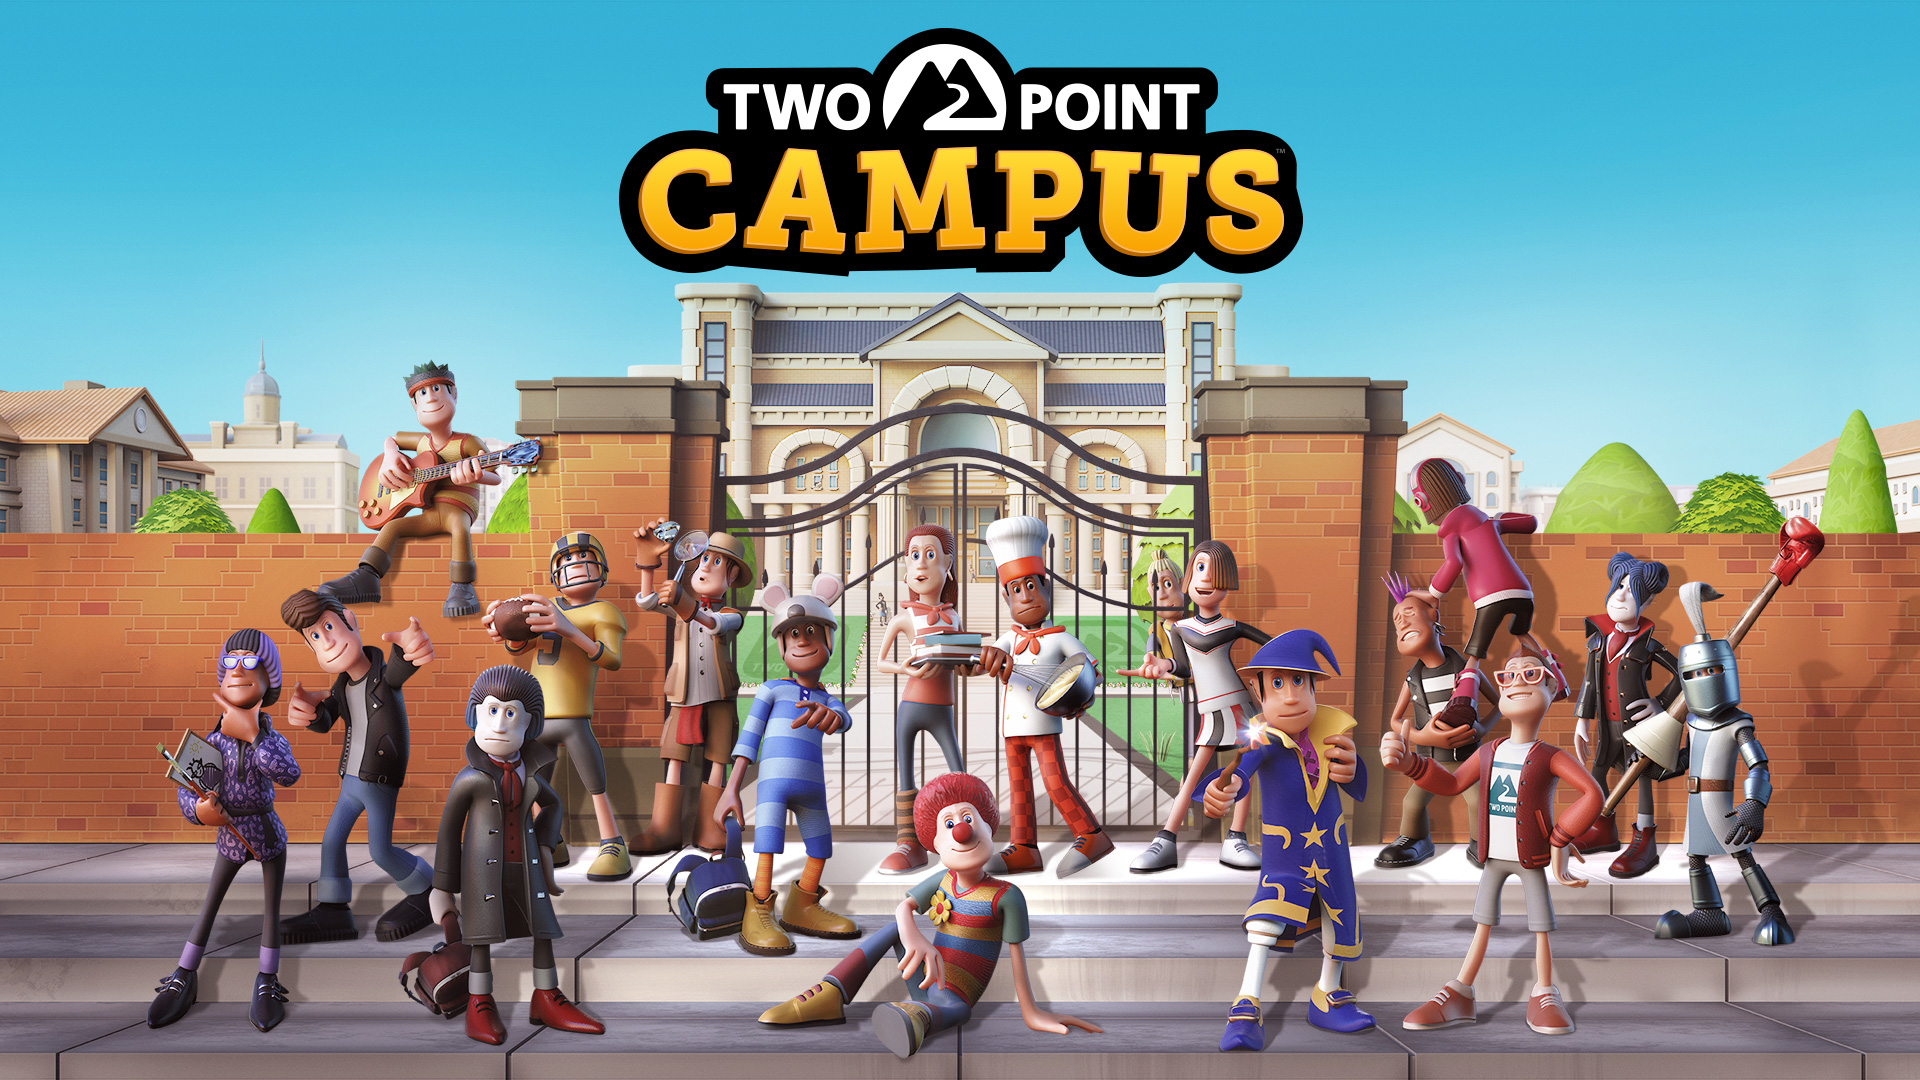 Enroll in Two Point Campus, out now on PC and consoles